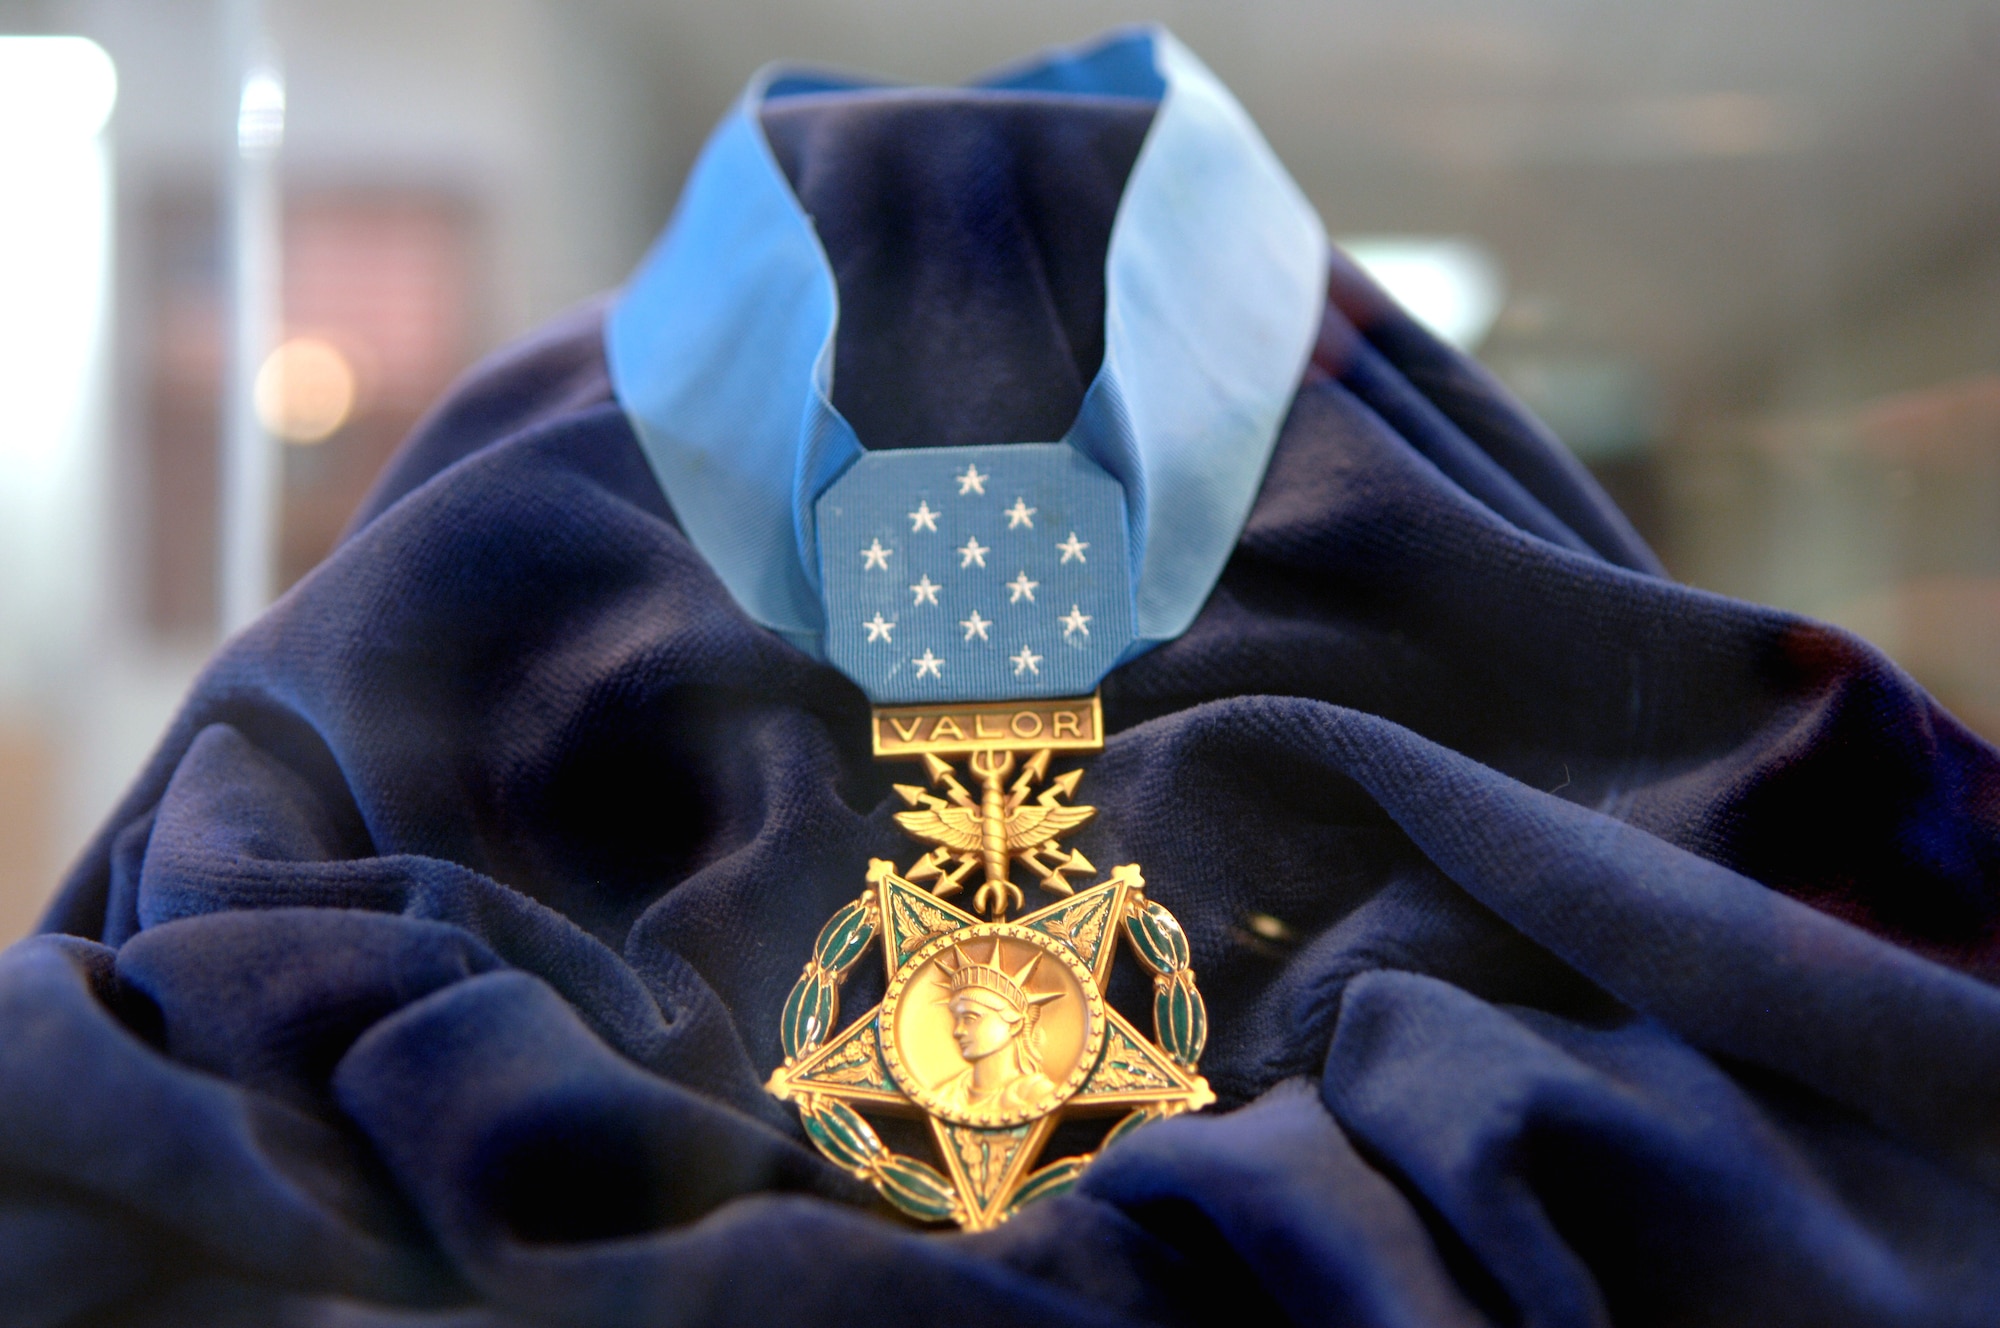 The Medal of Honor is the highest military decoration awarded by the United States government. It is bestowed on a member of the United States armed forces who distinguishes himself "conspicuously by gallantry and intrepidity at the risk of his life above and beyond the call of duty while engaged in an action against an enemy of the United States." Because of the nature of its criteria, the medal is often awarded posthumously. (U.S. Air Force photo/Airman 1st Class Veronica Salgado)

